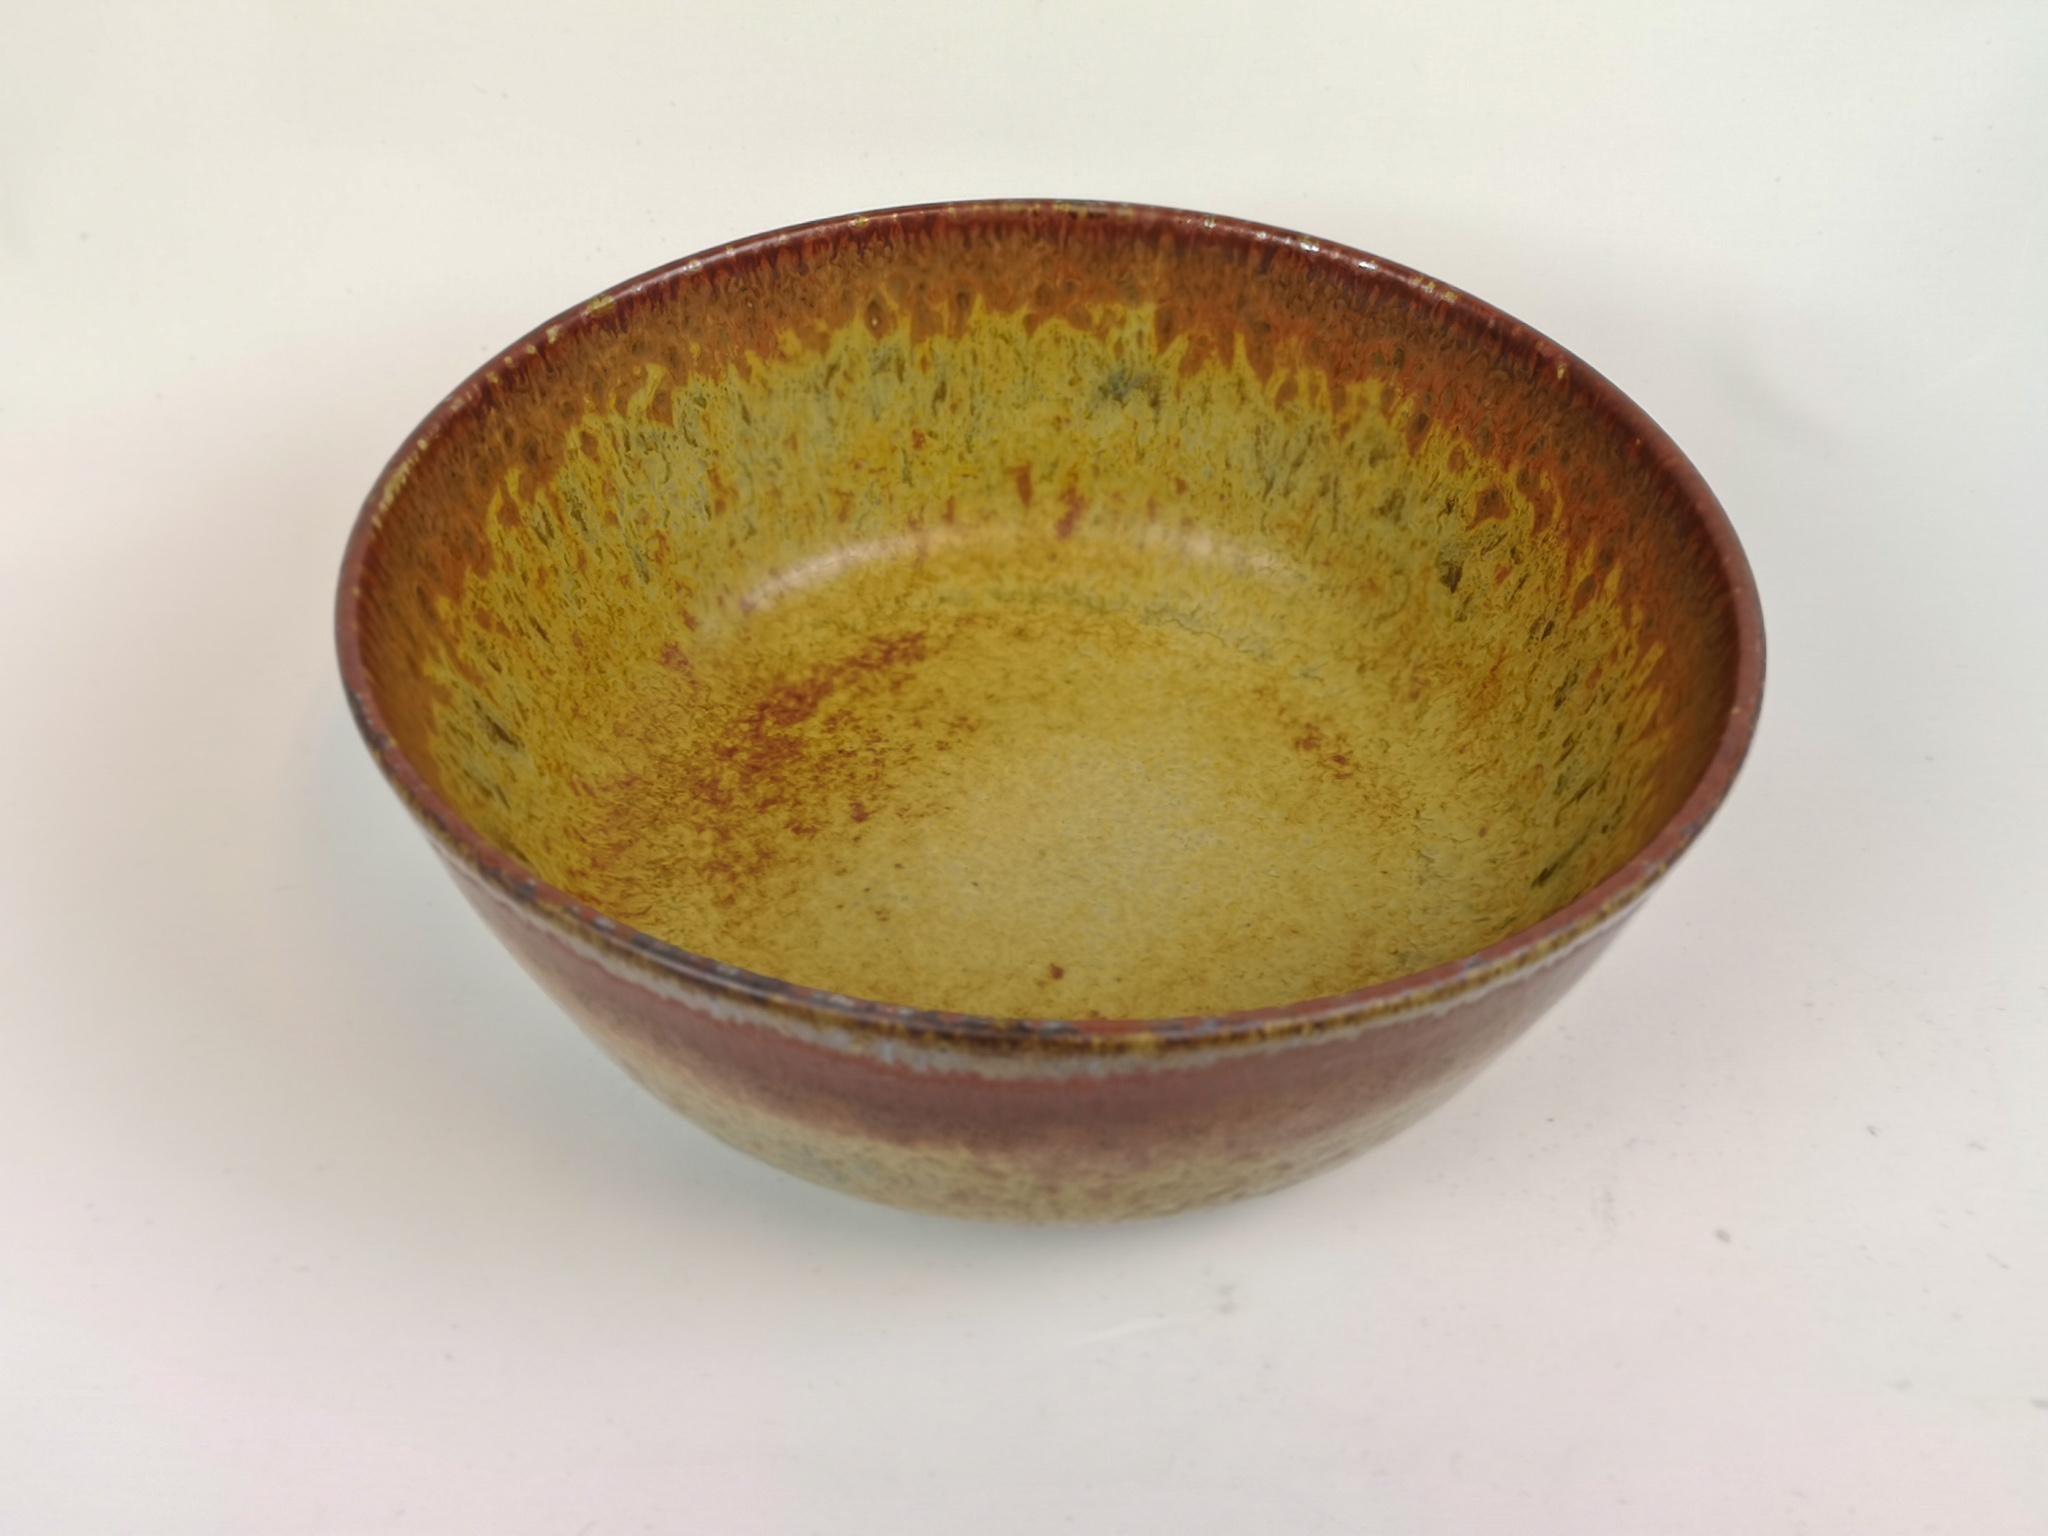 This large unique bowl has a wonderful glaze. It’s made in Sweden at Rörstrand and designed by Carl-Harry Stålhane. There’s only one of its kind and is therefore a spectacular piece to have. Its stunning in its design and deep glaze pattern. Signed